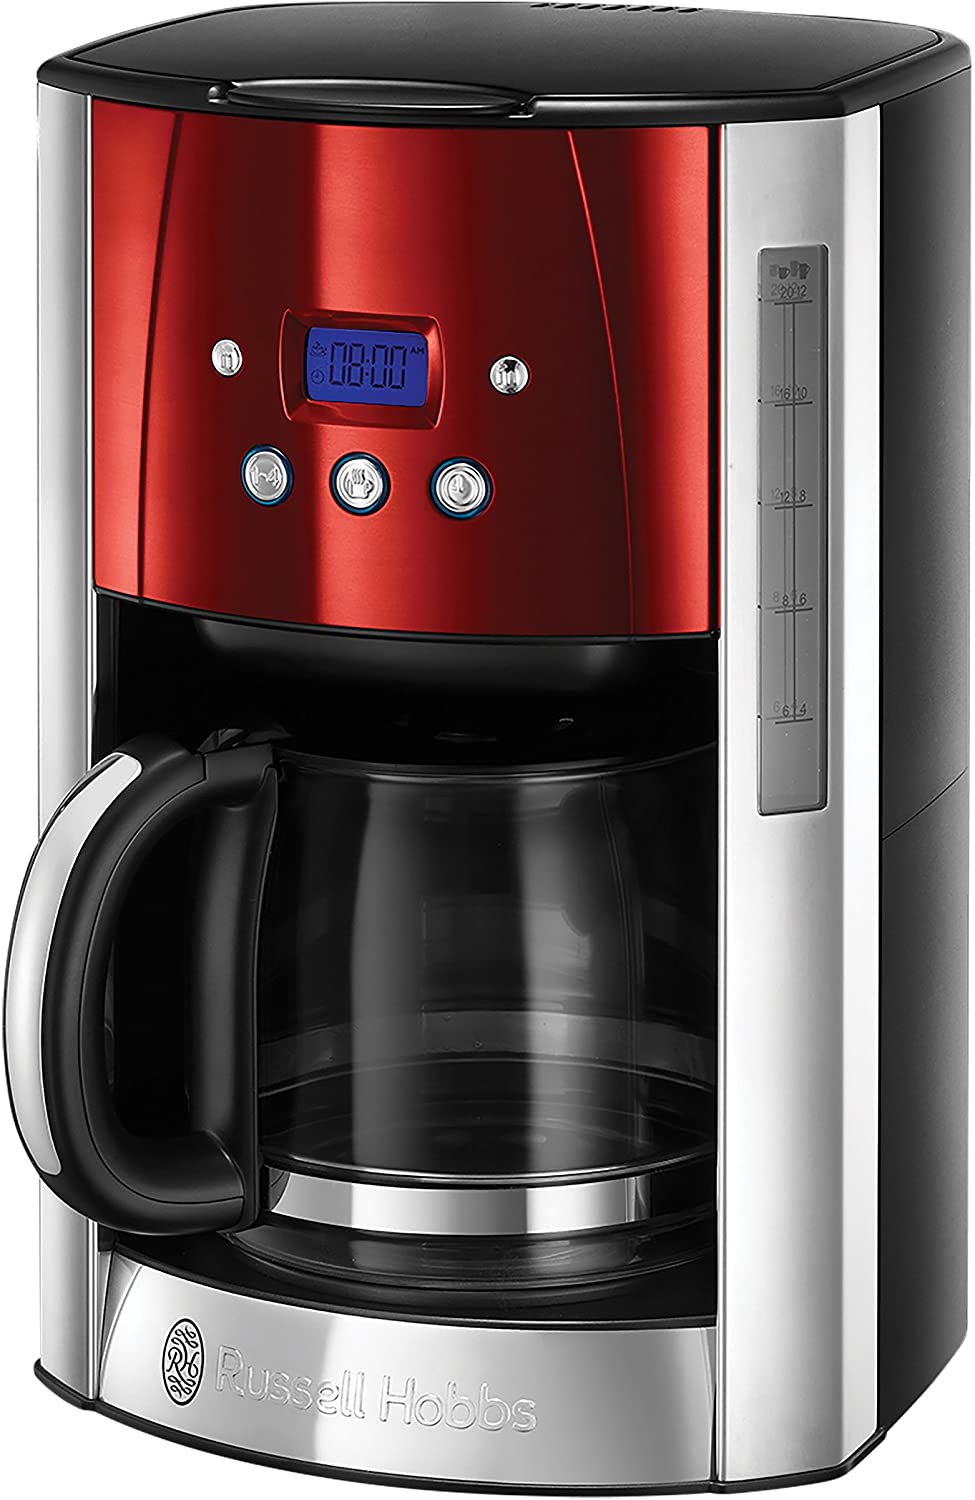 Russell Hobbs Luna 23240-56 Digital Coffee Machine, Red, up to 12 Cups, 1.5 L Glass Jug, Programmable Timer, Warming Plate, Automatic Shut-Off, 1000 W, Filter Coffee Machine